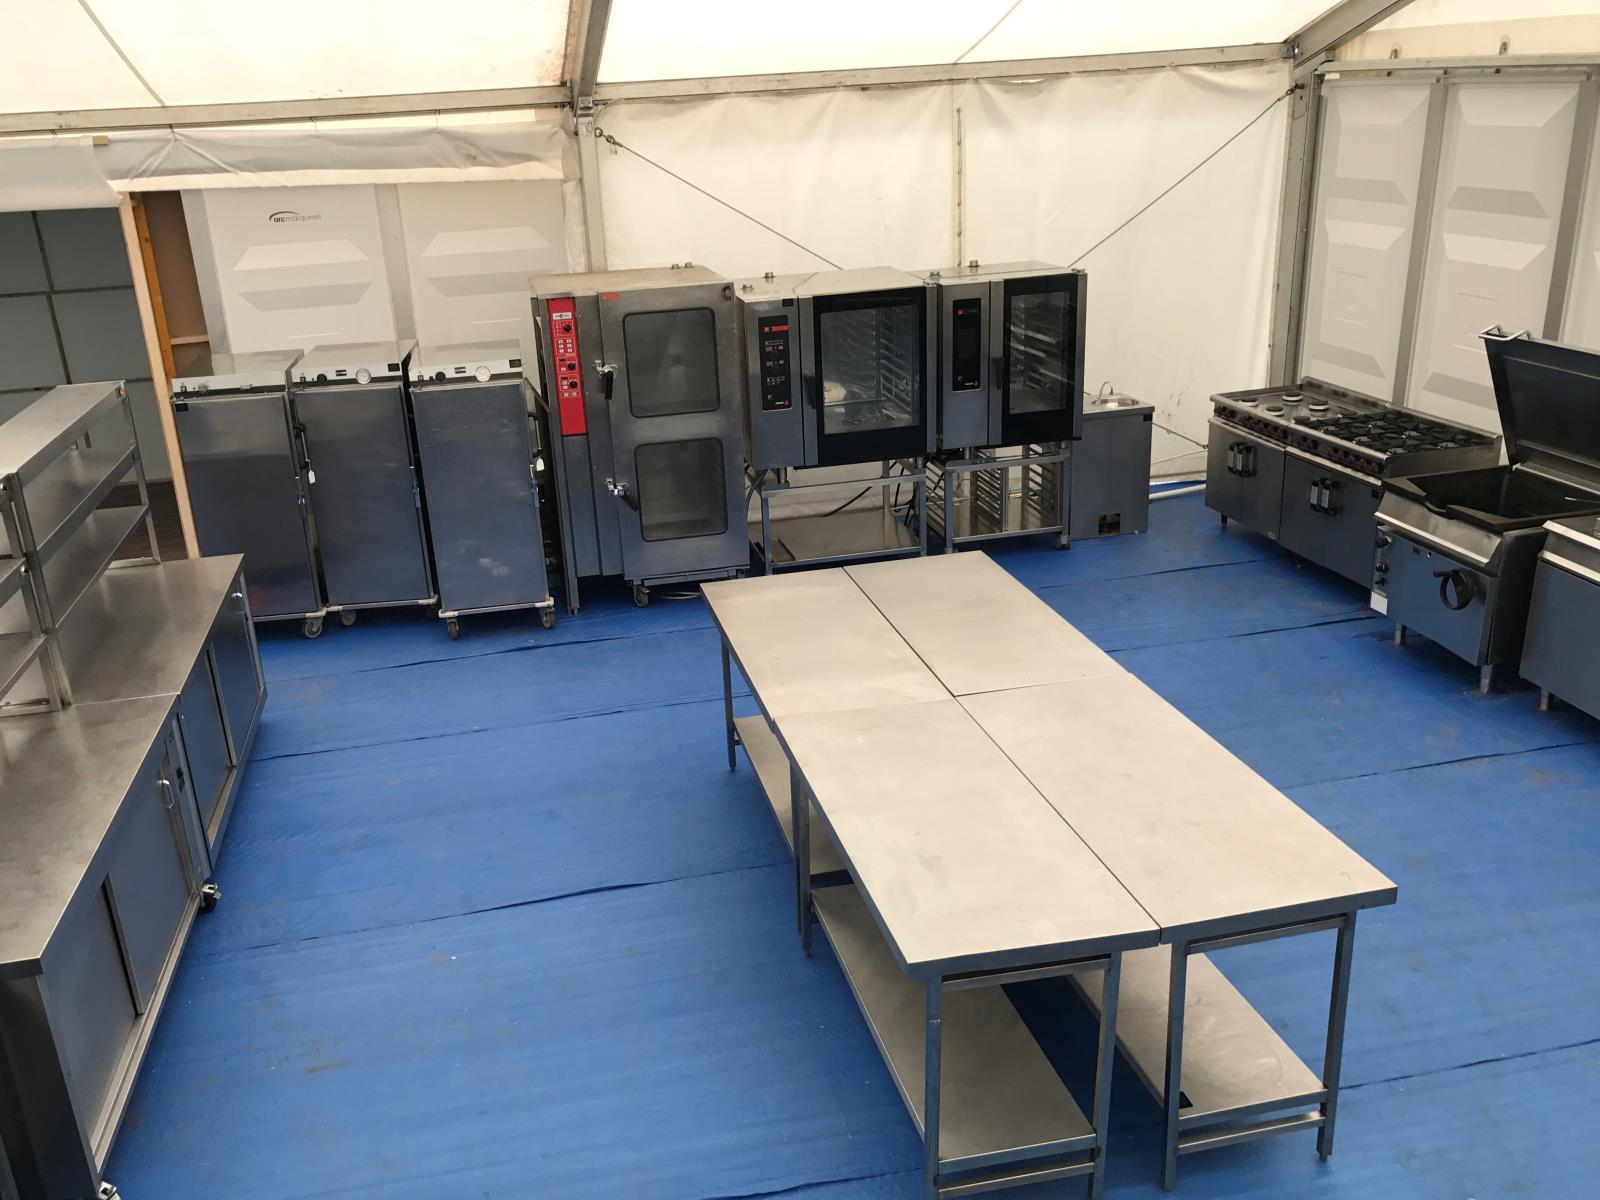 Marquee commercial events kitchen for a large sporting event with prep, production, refrigeration and servery.